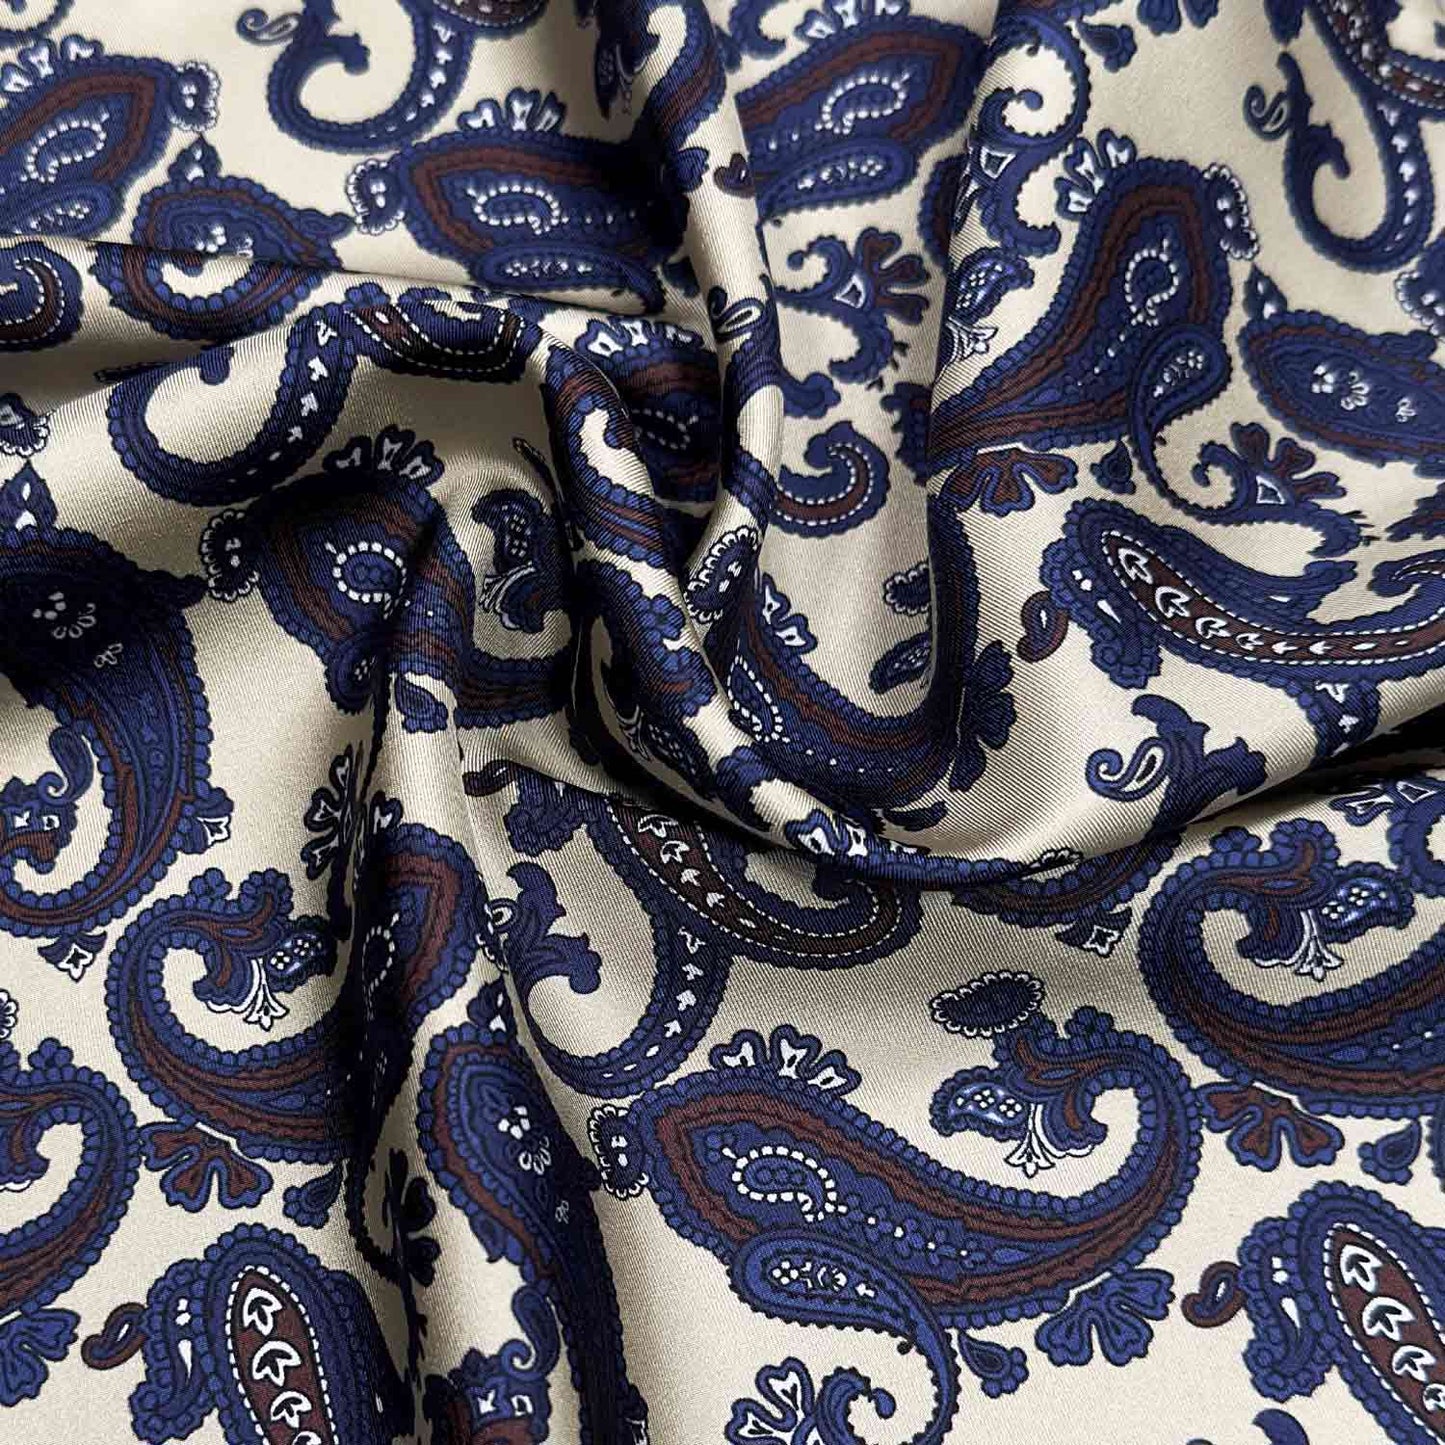 Ivory White Silk Pocket Square Paisley Pattern. Men's paisley pocket square made with soft silk and with rolled edge